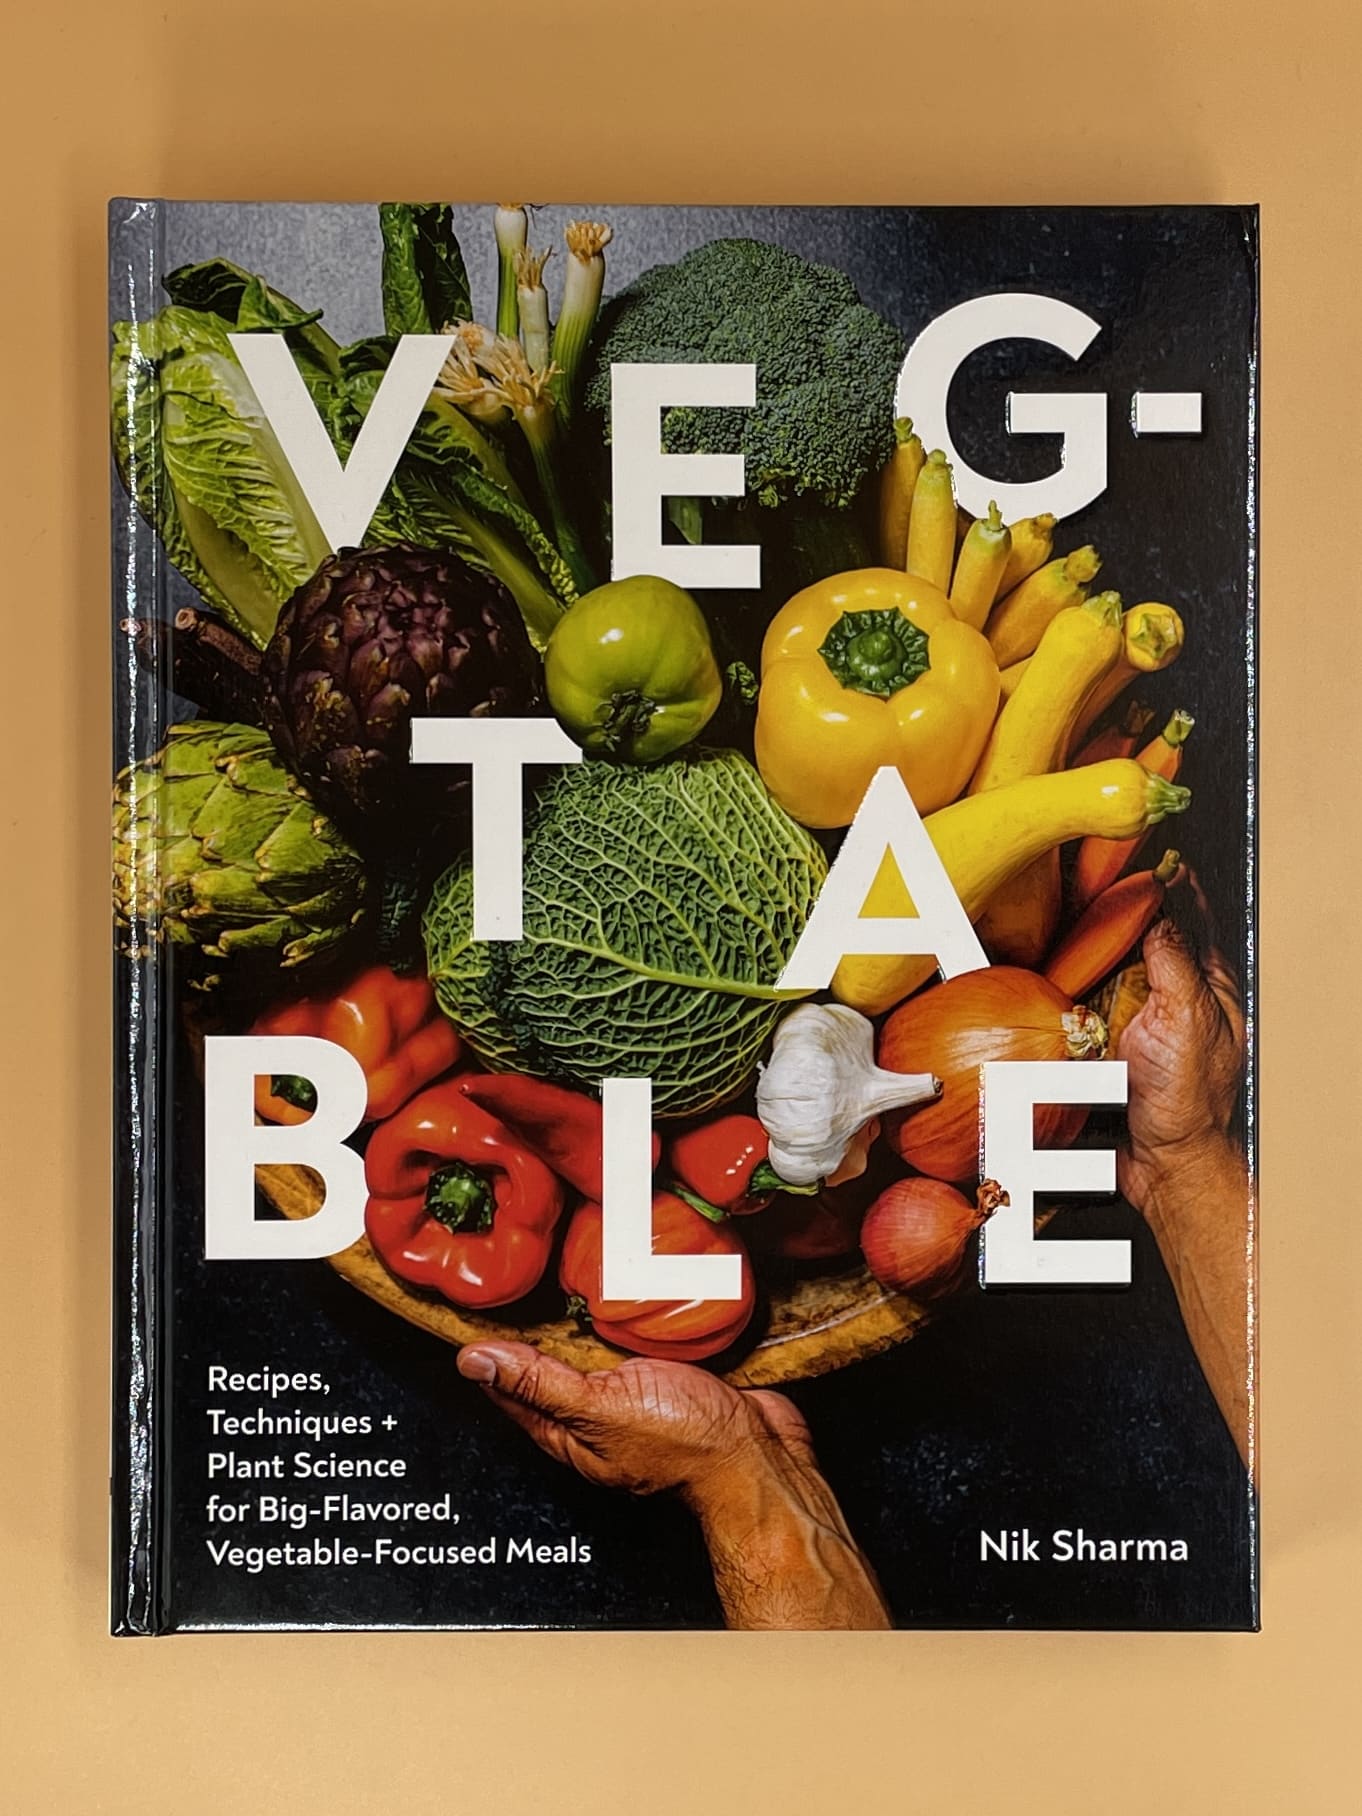 Veg-Table: Recipes, Techniques, and Plant Science for Big-Flavored, Vegetable-Focused Meals (Nik Sharma)